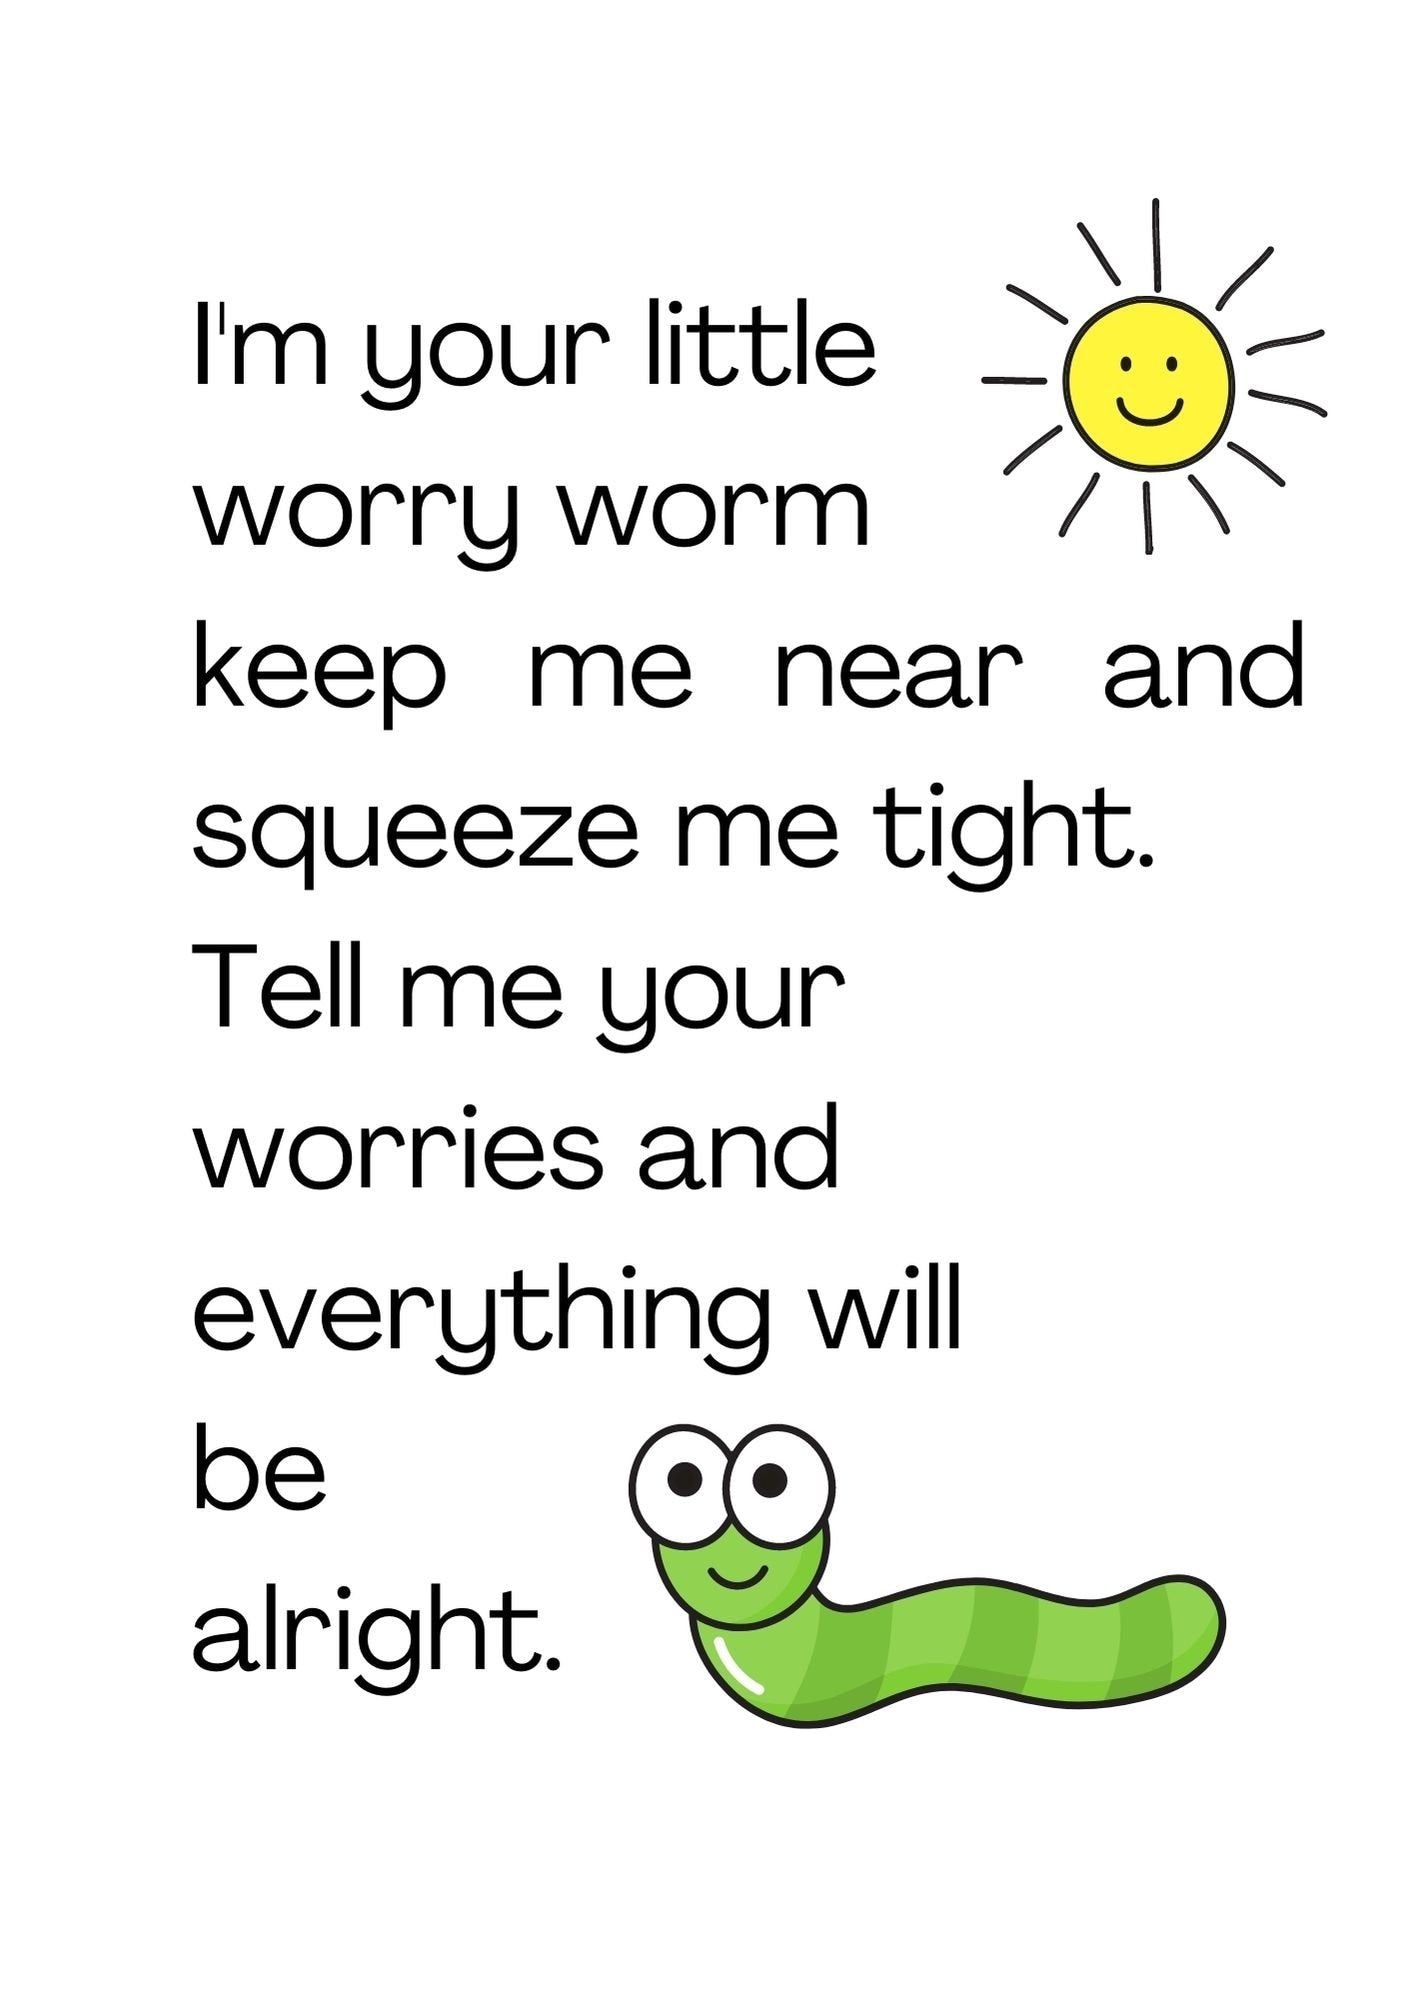 Worry Worm Poem Printable Post Cards And Tags In 2 Sizes Poems Worry Dolls Crochet Applique Patterns Free